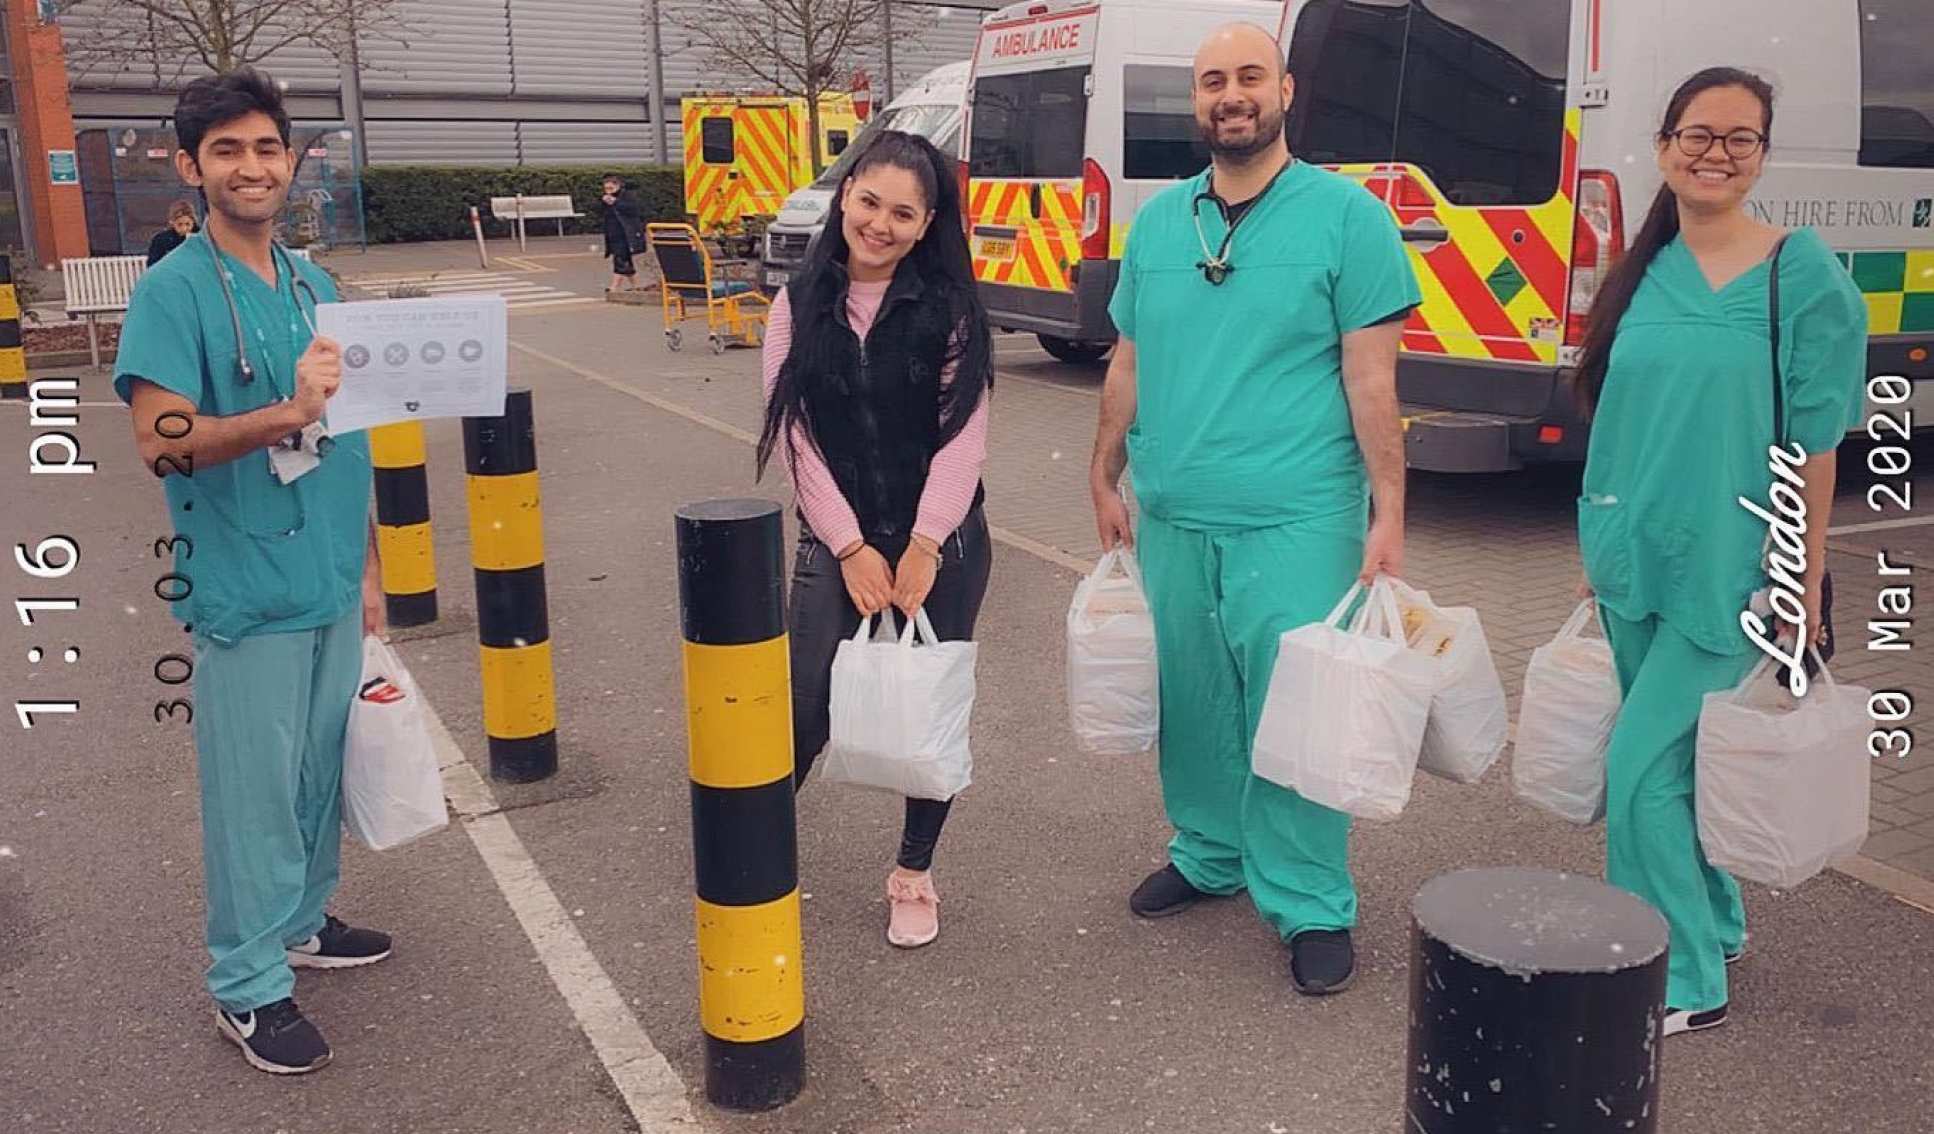 NHS workers collect food parcels with bags in hand